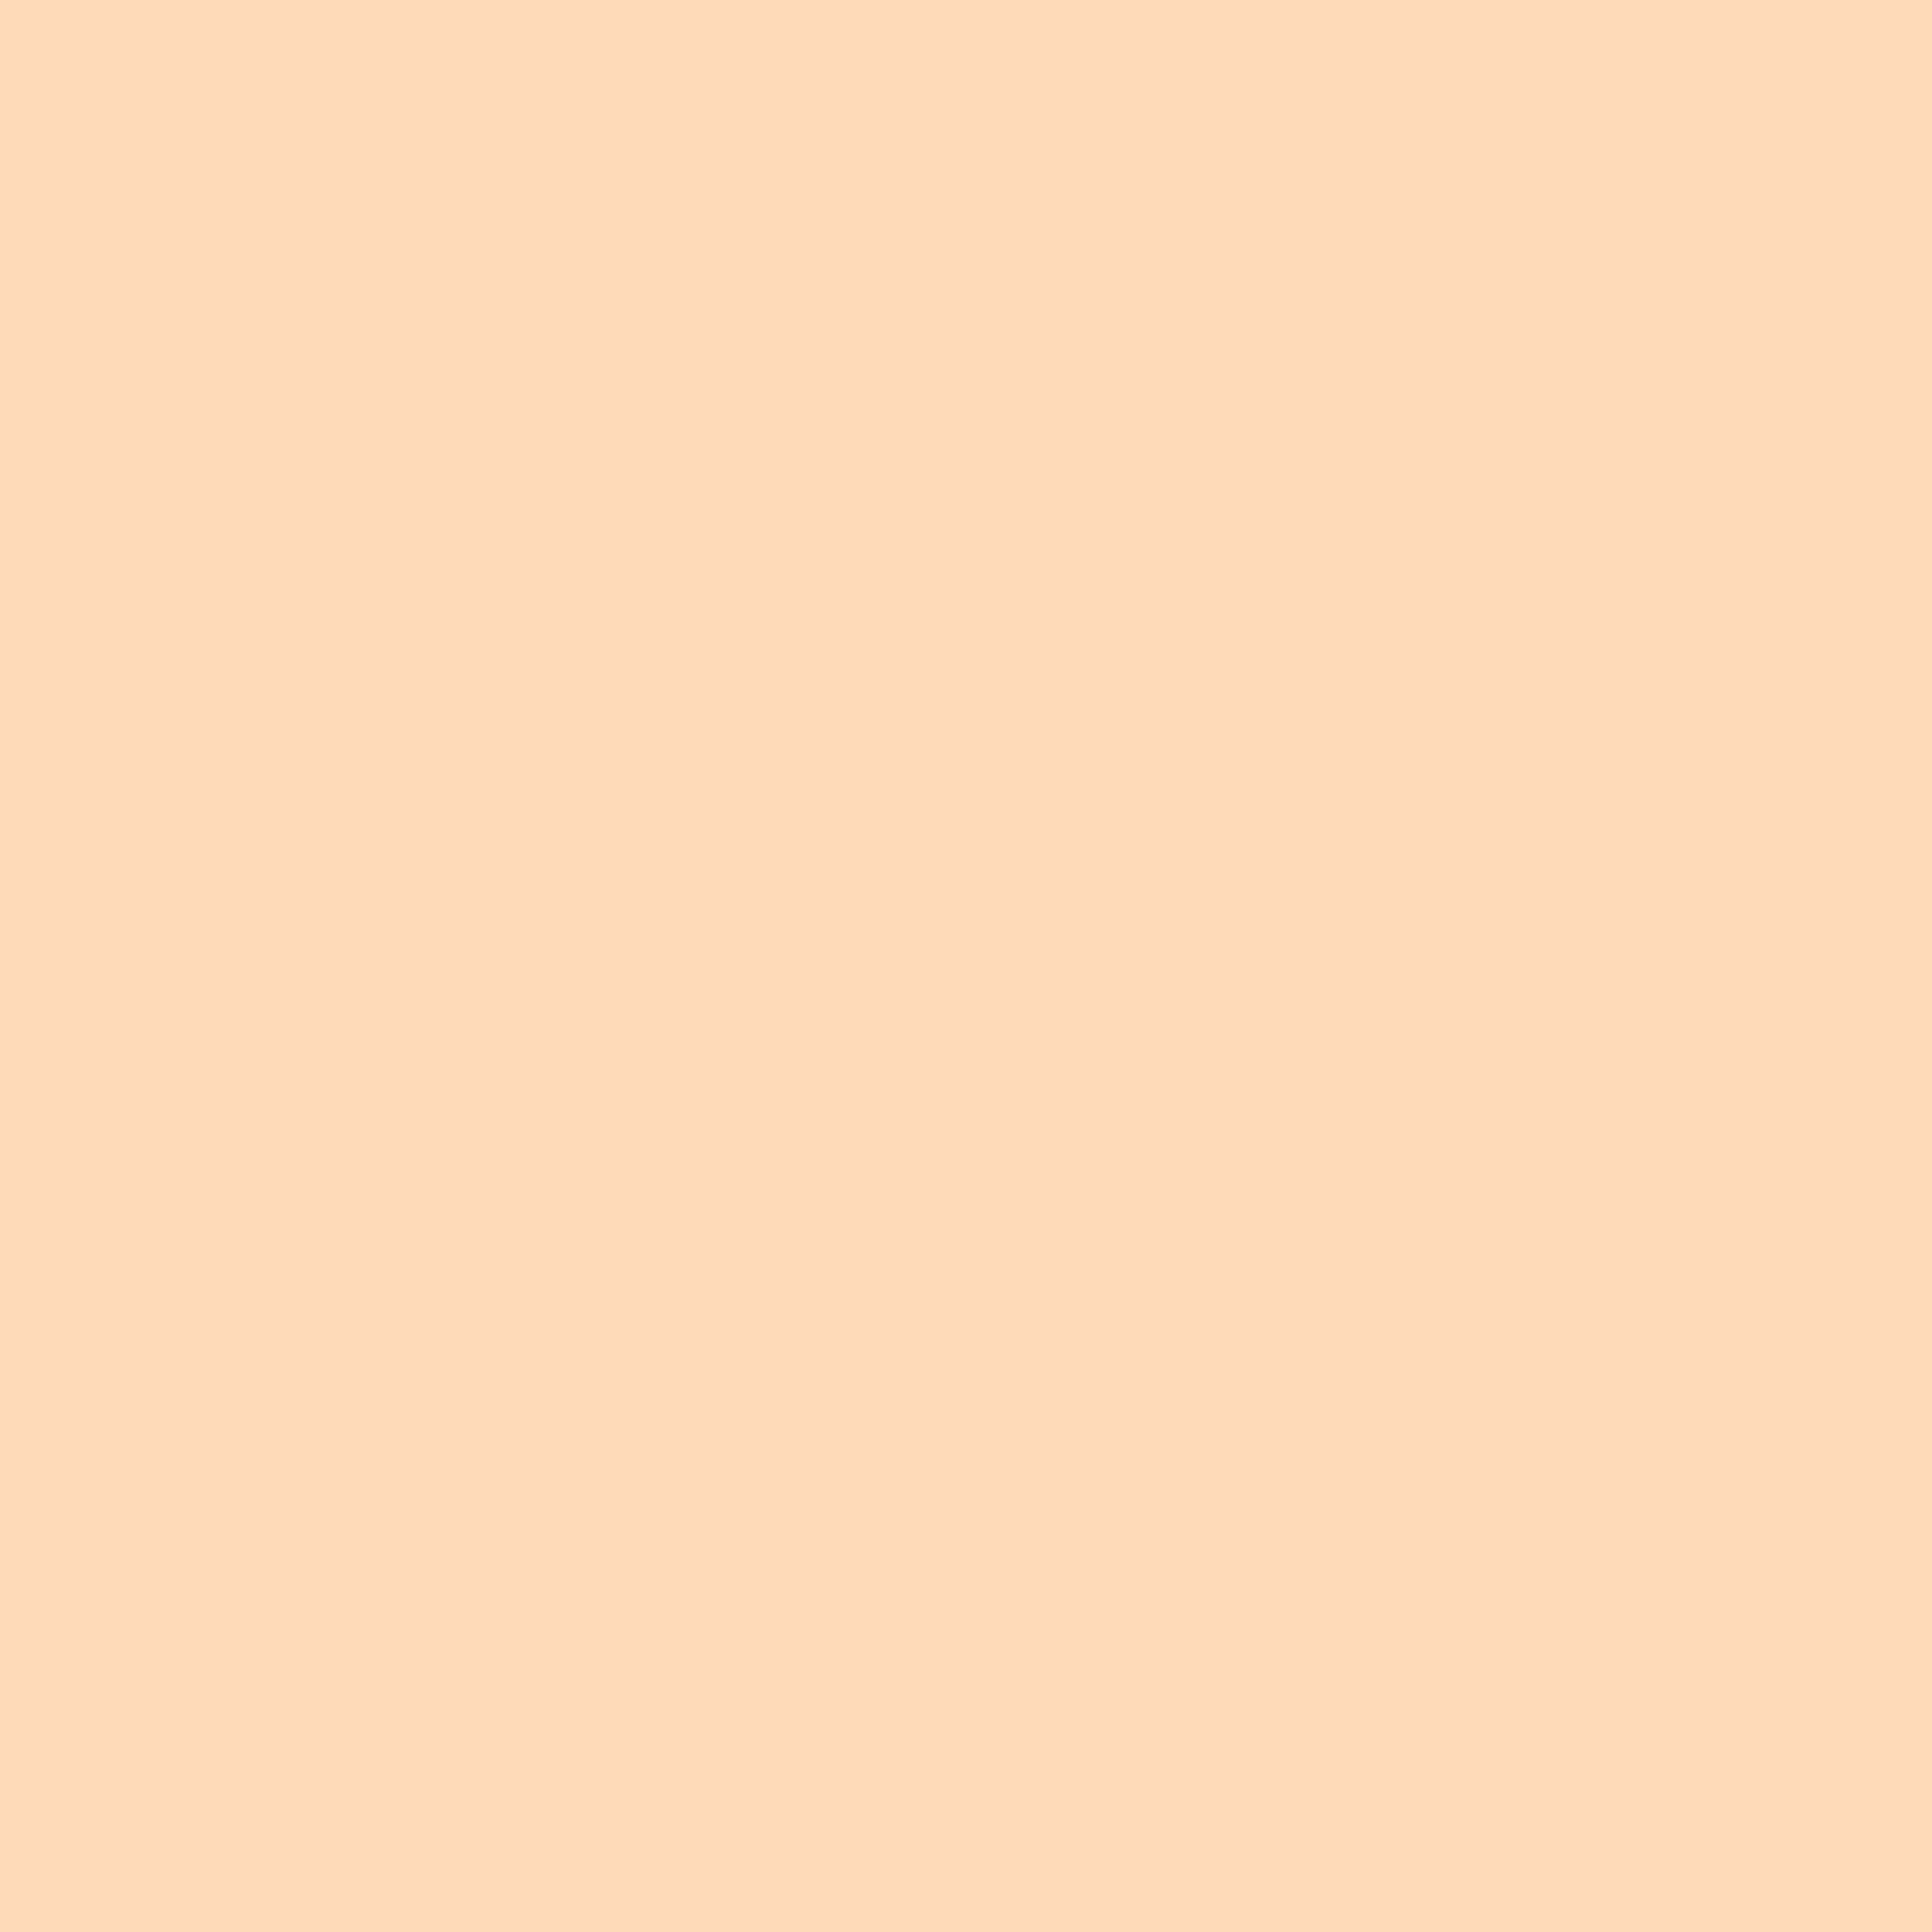 2732x2732 Peach Puff Solid Color Background